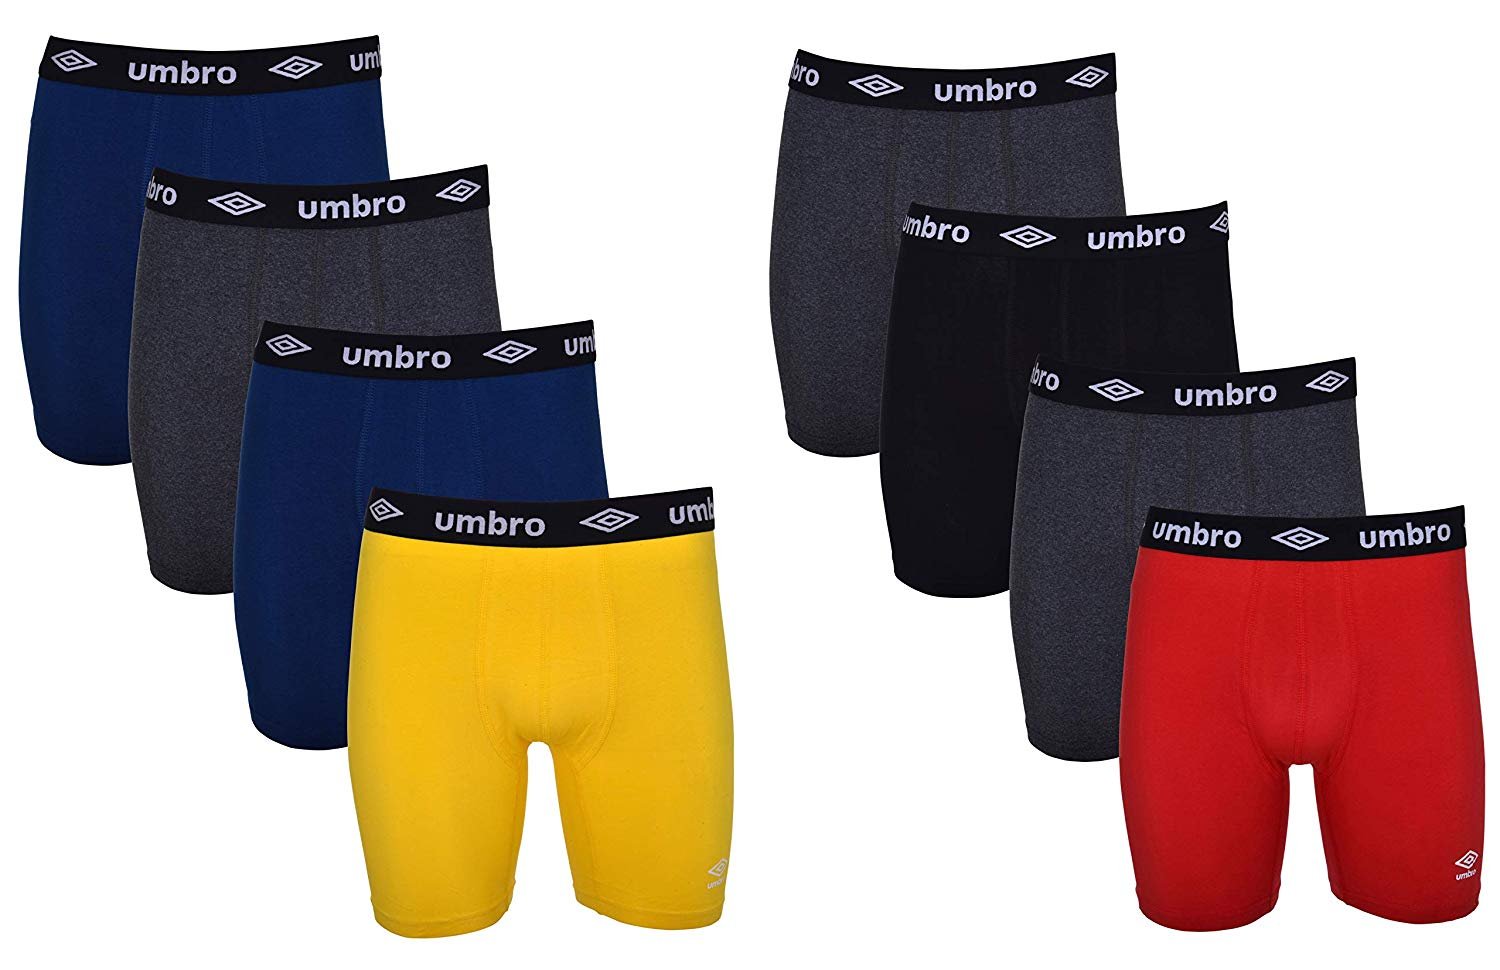 XX-Large Color May Vary Lee Mens Boxer Briefs Tag Free Underwear 100% Cotton Pack of 2